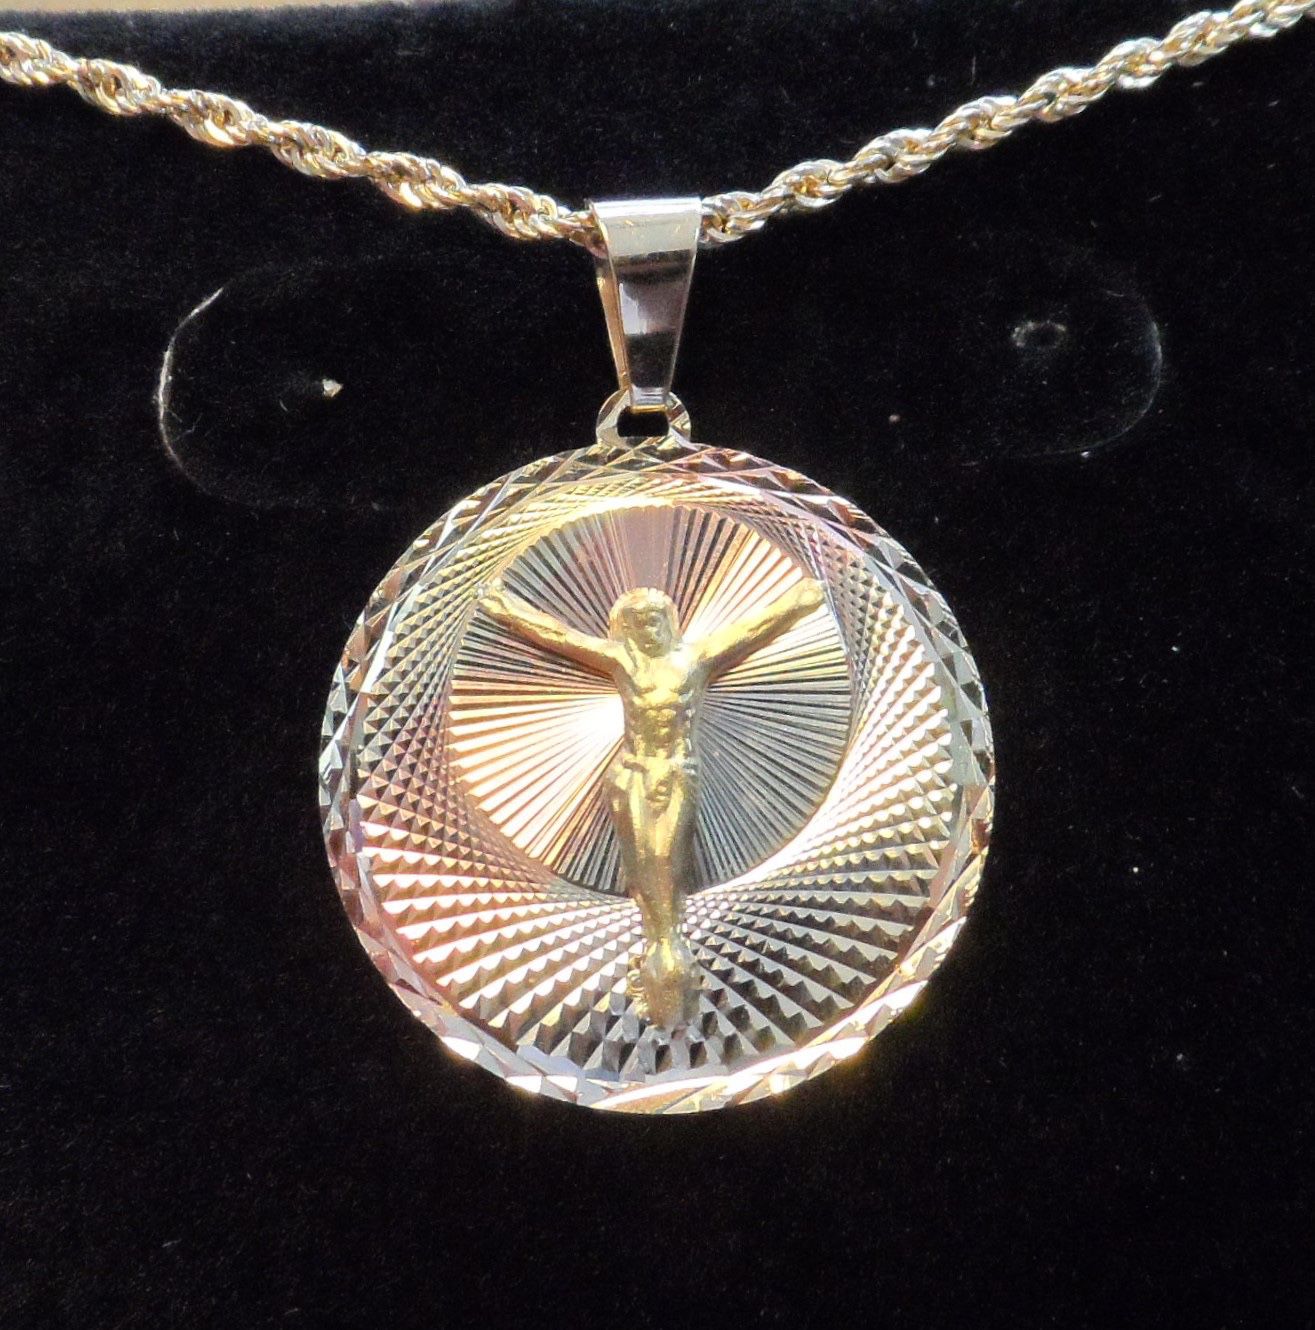 NEW 10K GOLD RELIGIOUS PENDANT WITH CHAIN